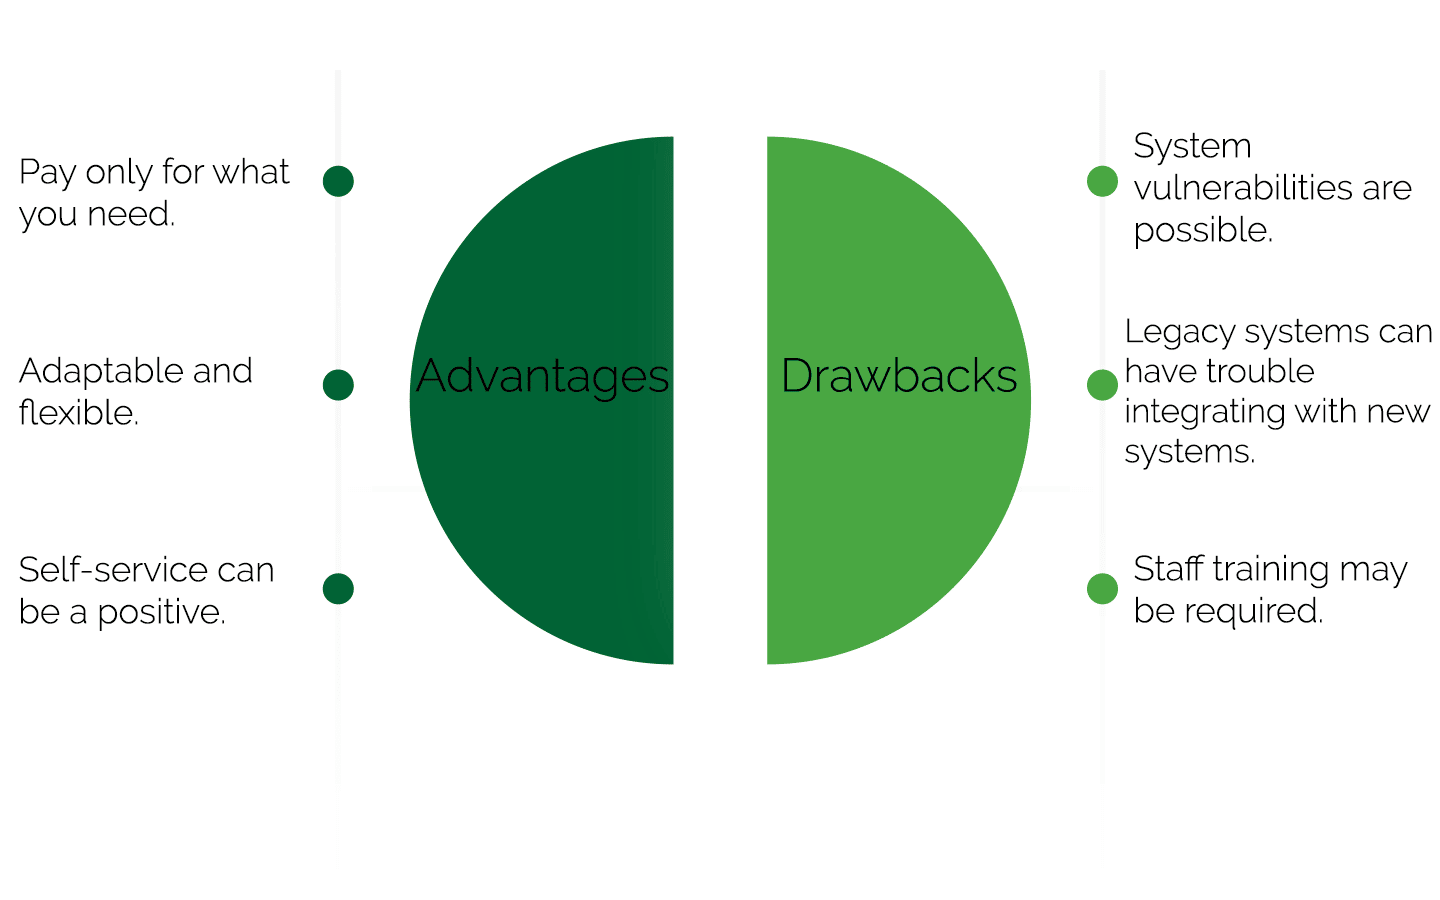 Chart of advantages and drawbacks of IaaS